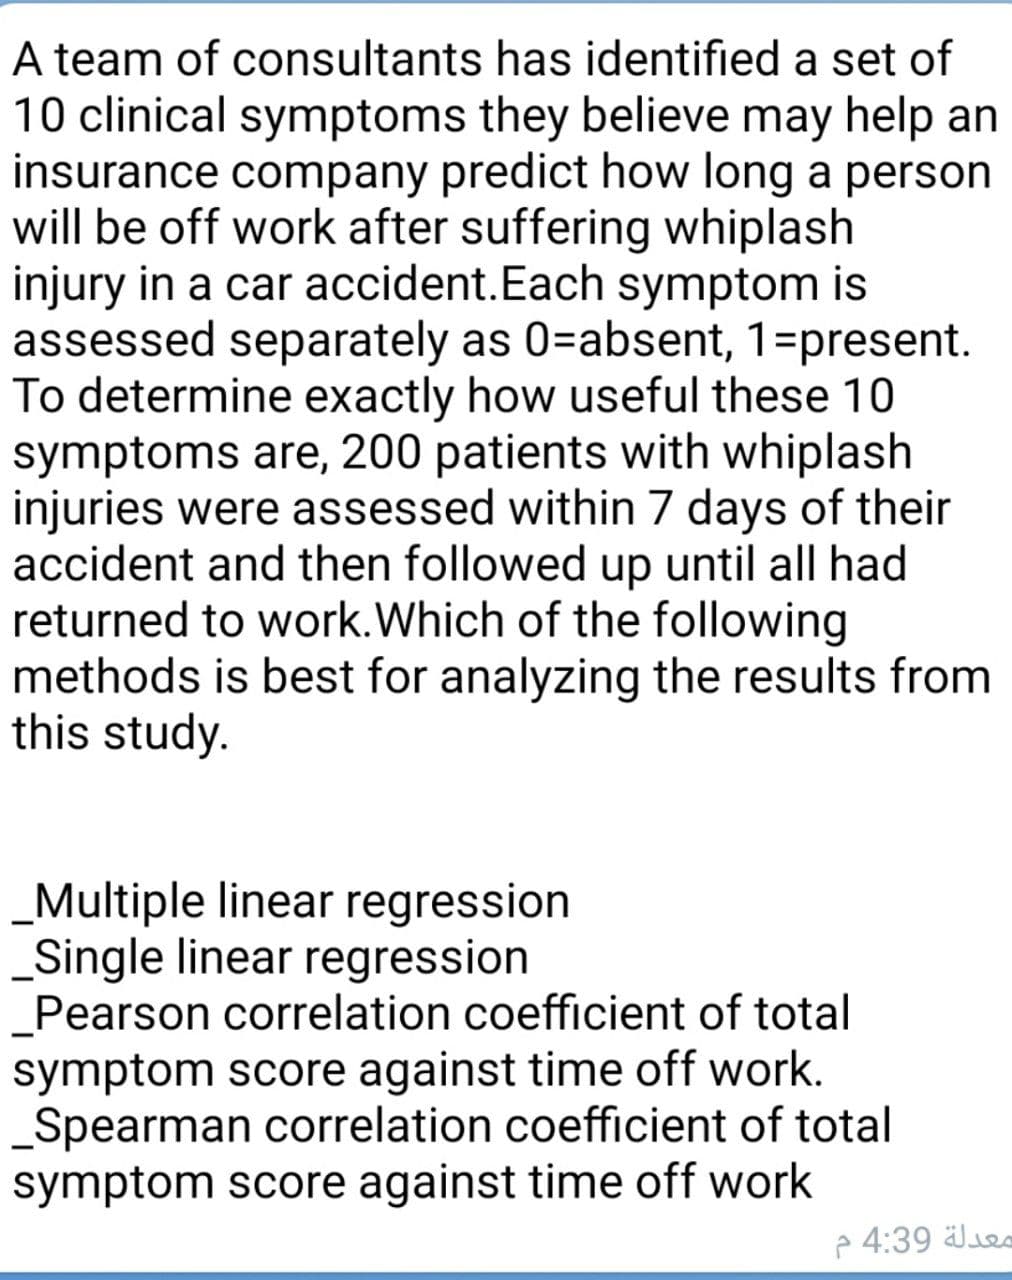 A team of consultants has identified a set of
10 clinical symptoms they believe may help an
insurance company predict how long a person
will be off work after suffering whiplash
injury in a car accident.Each symptom is
assessed separately as 0=absent, 1=present.
To determine exactly how useful these 10
symptoms are, 200 patients with whiplash
injuries were assessed within 7 days of their
accident and then followed up until all had
returned to work.Which of the following
methods is best for analyzing the results from
this study.
_Multiple linear regression
_Single linear regression
_Pearson correlation coefficient of total
symptom score against time off work.
Spearman correlation coefficient of total
symptom score against time off work
p 4:39 äle
